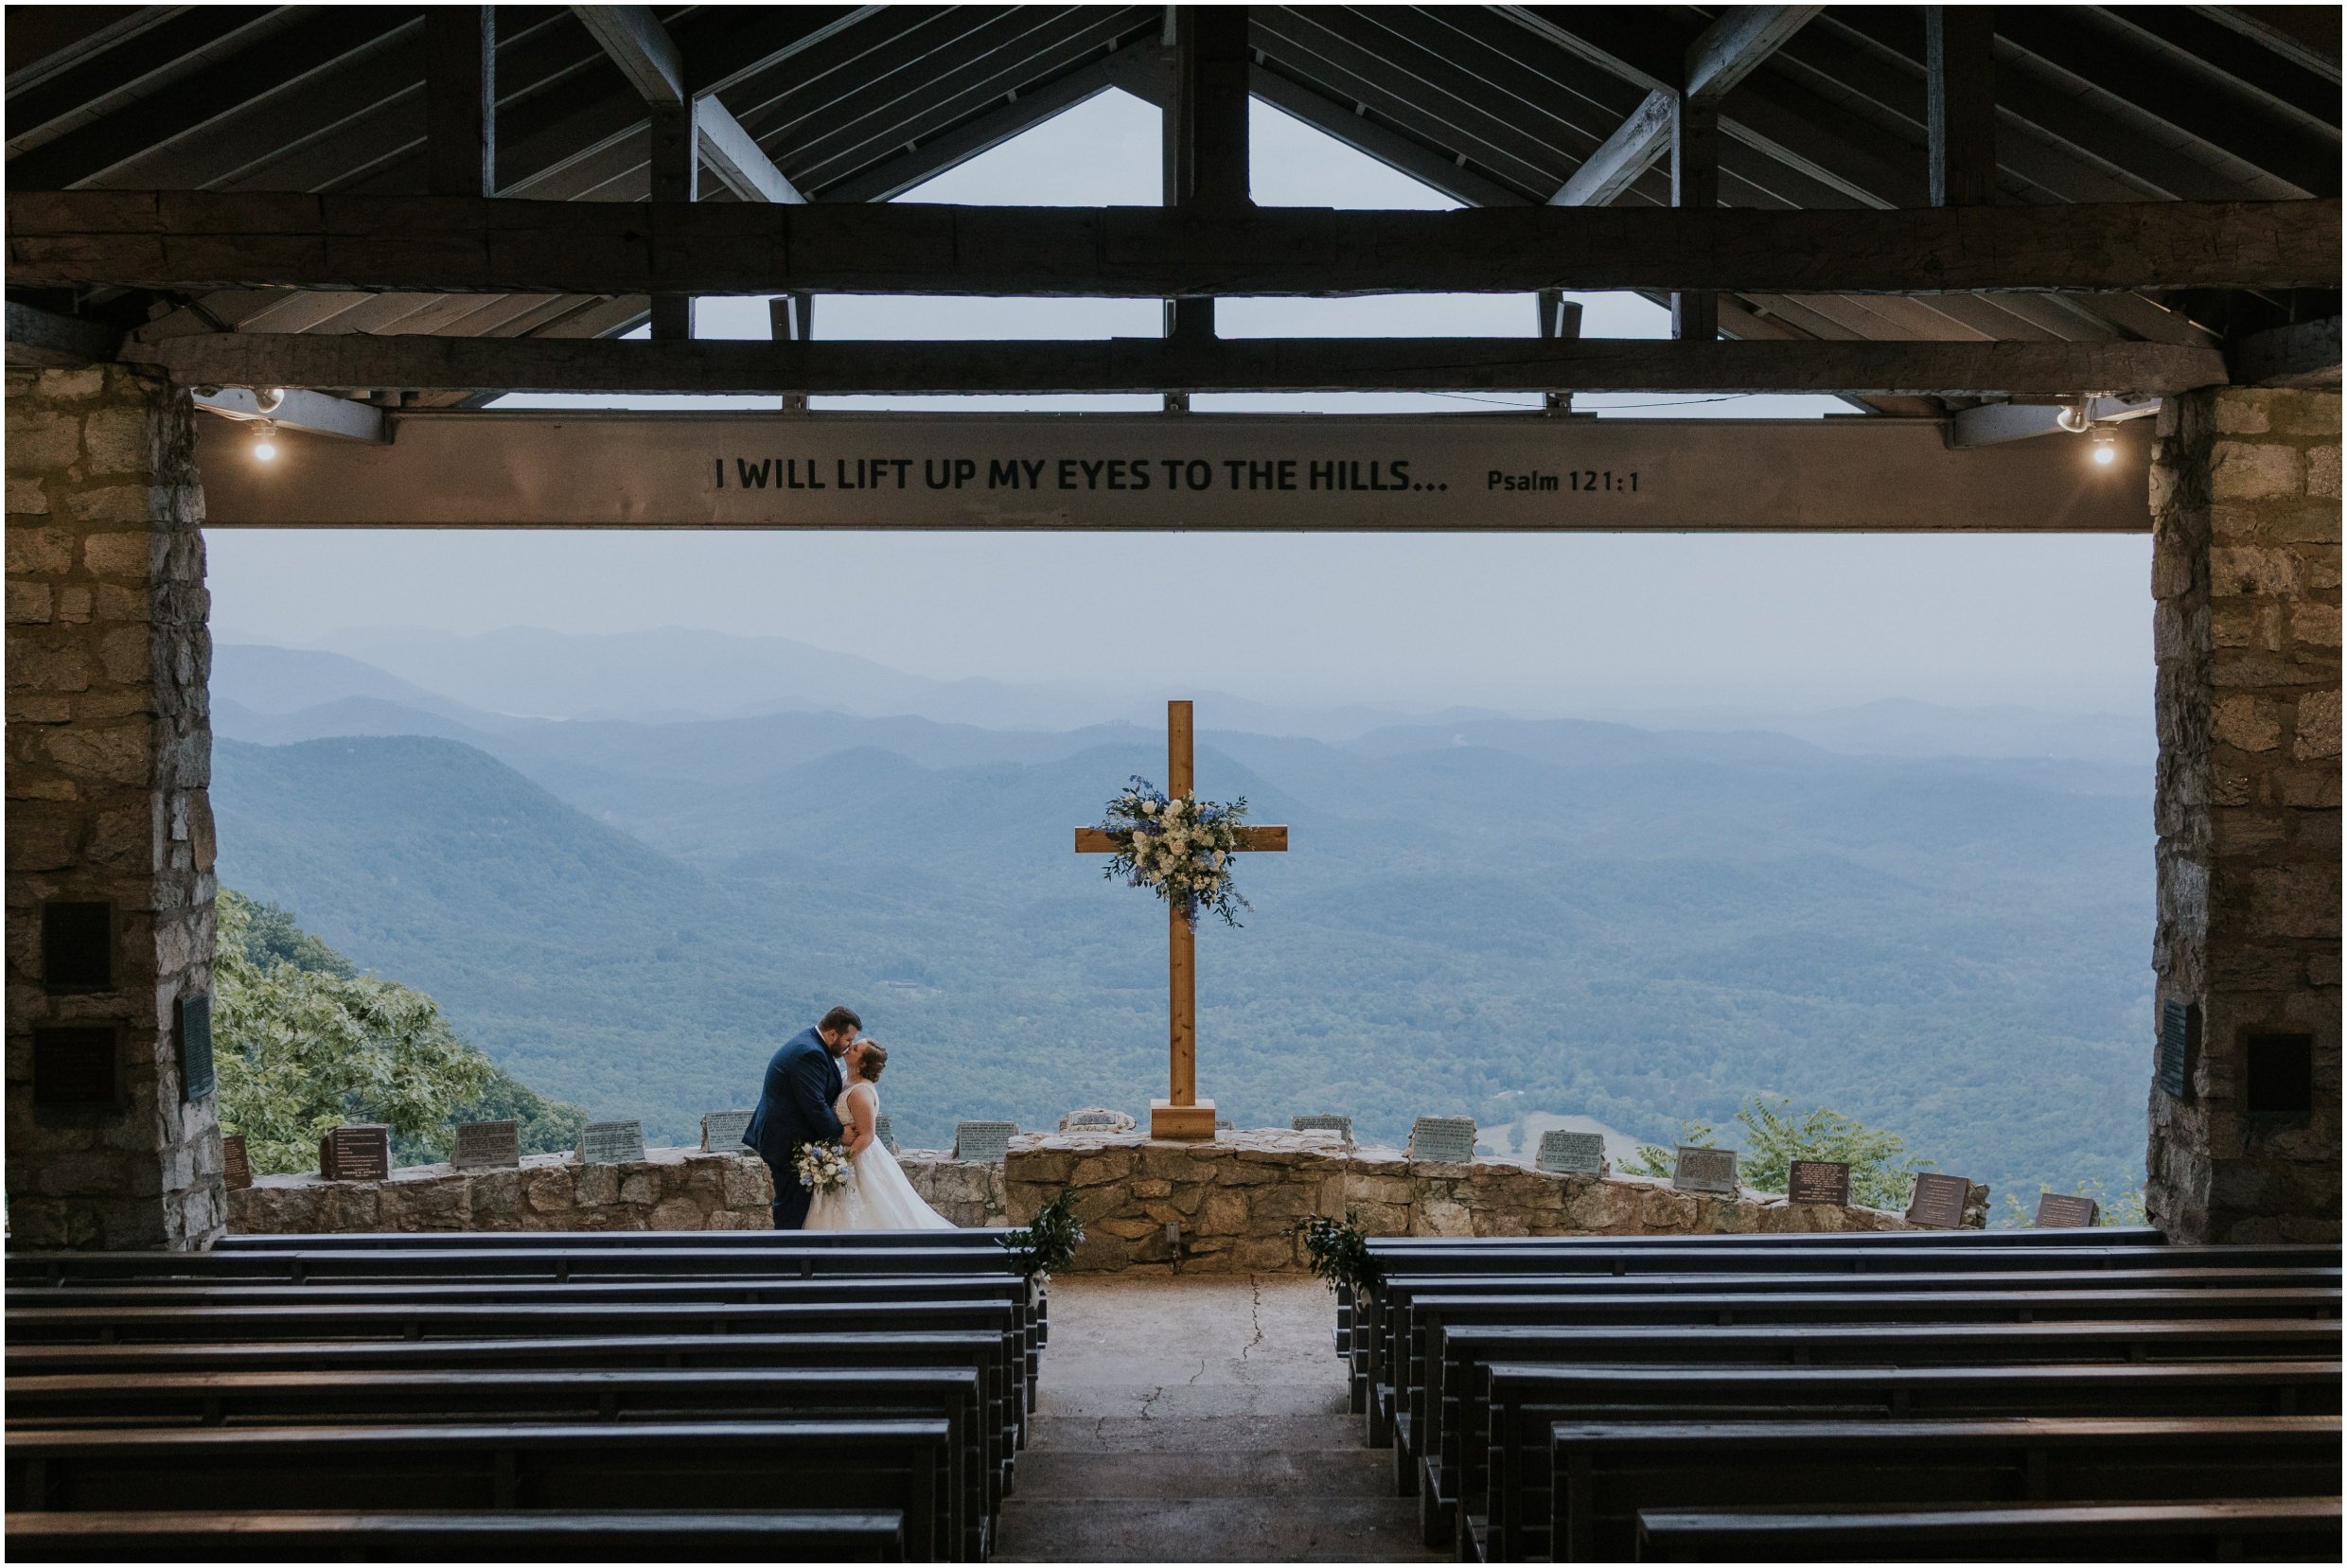 the-pretty-place-fred-symmes-chapel-greenville-sc-brevard-nc-camp-mountain-wedding-south-carolina-tennessee-katy-sergent-photography_0023.jpg